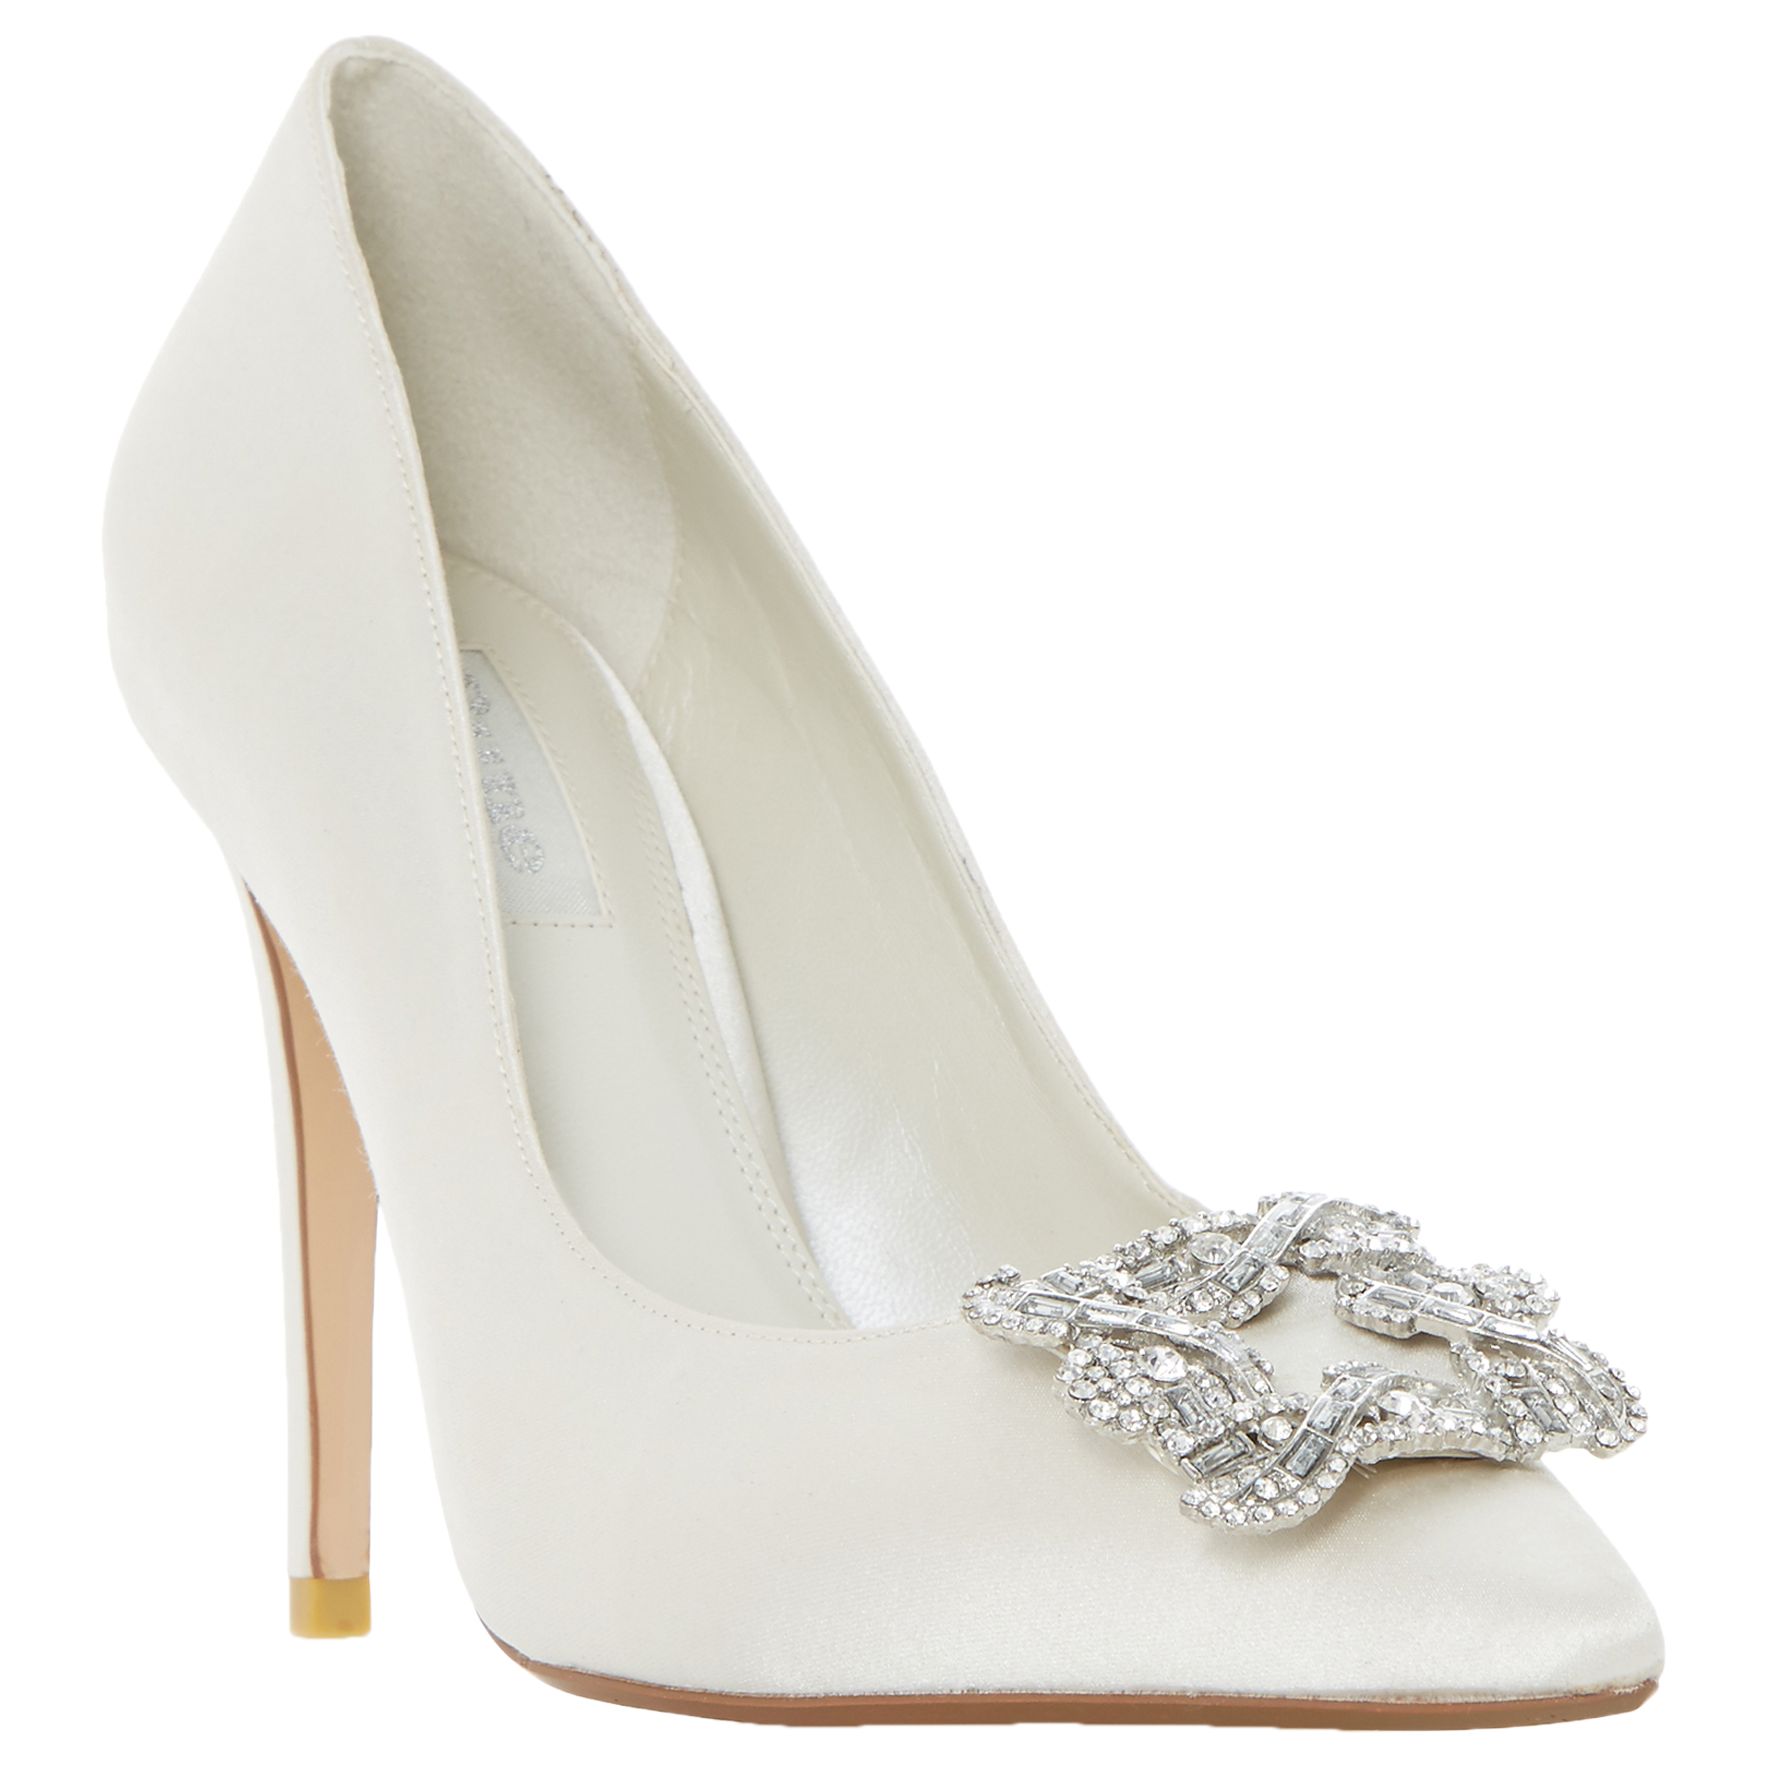 Dune Bridal Collection Breanna Jewel Stiletto Court Shoes, Ivory Satin, 3